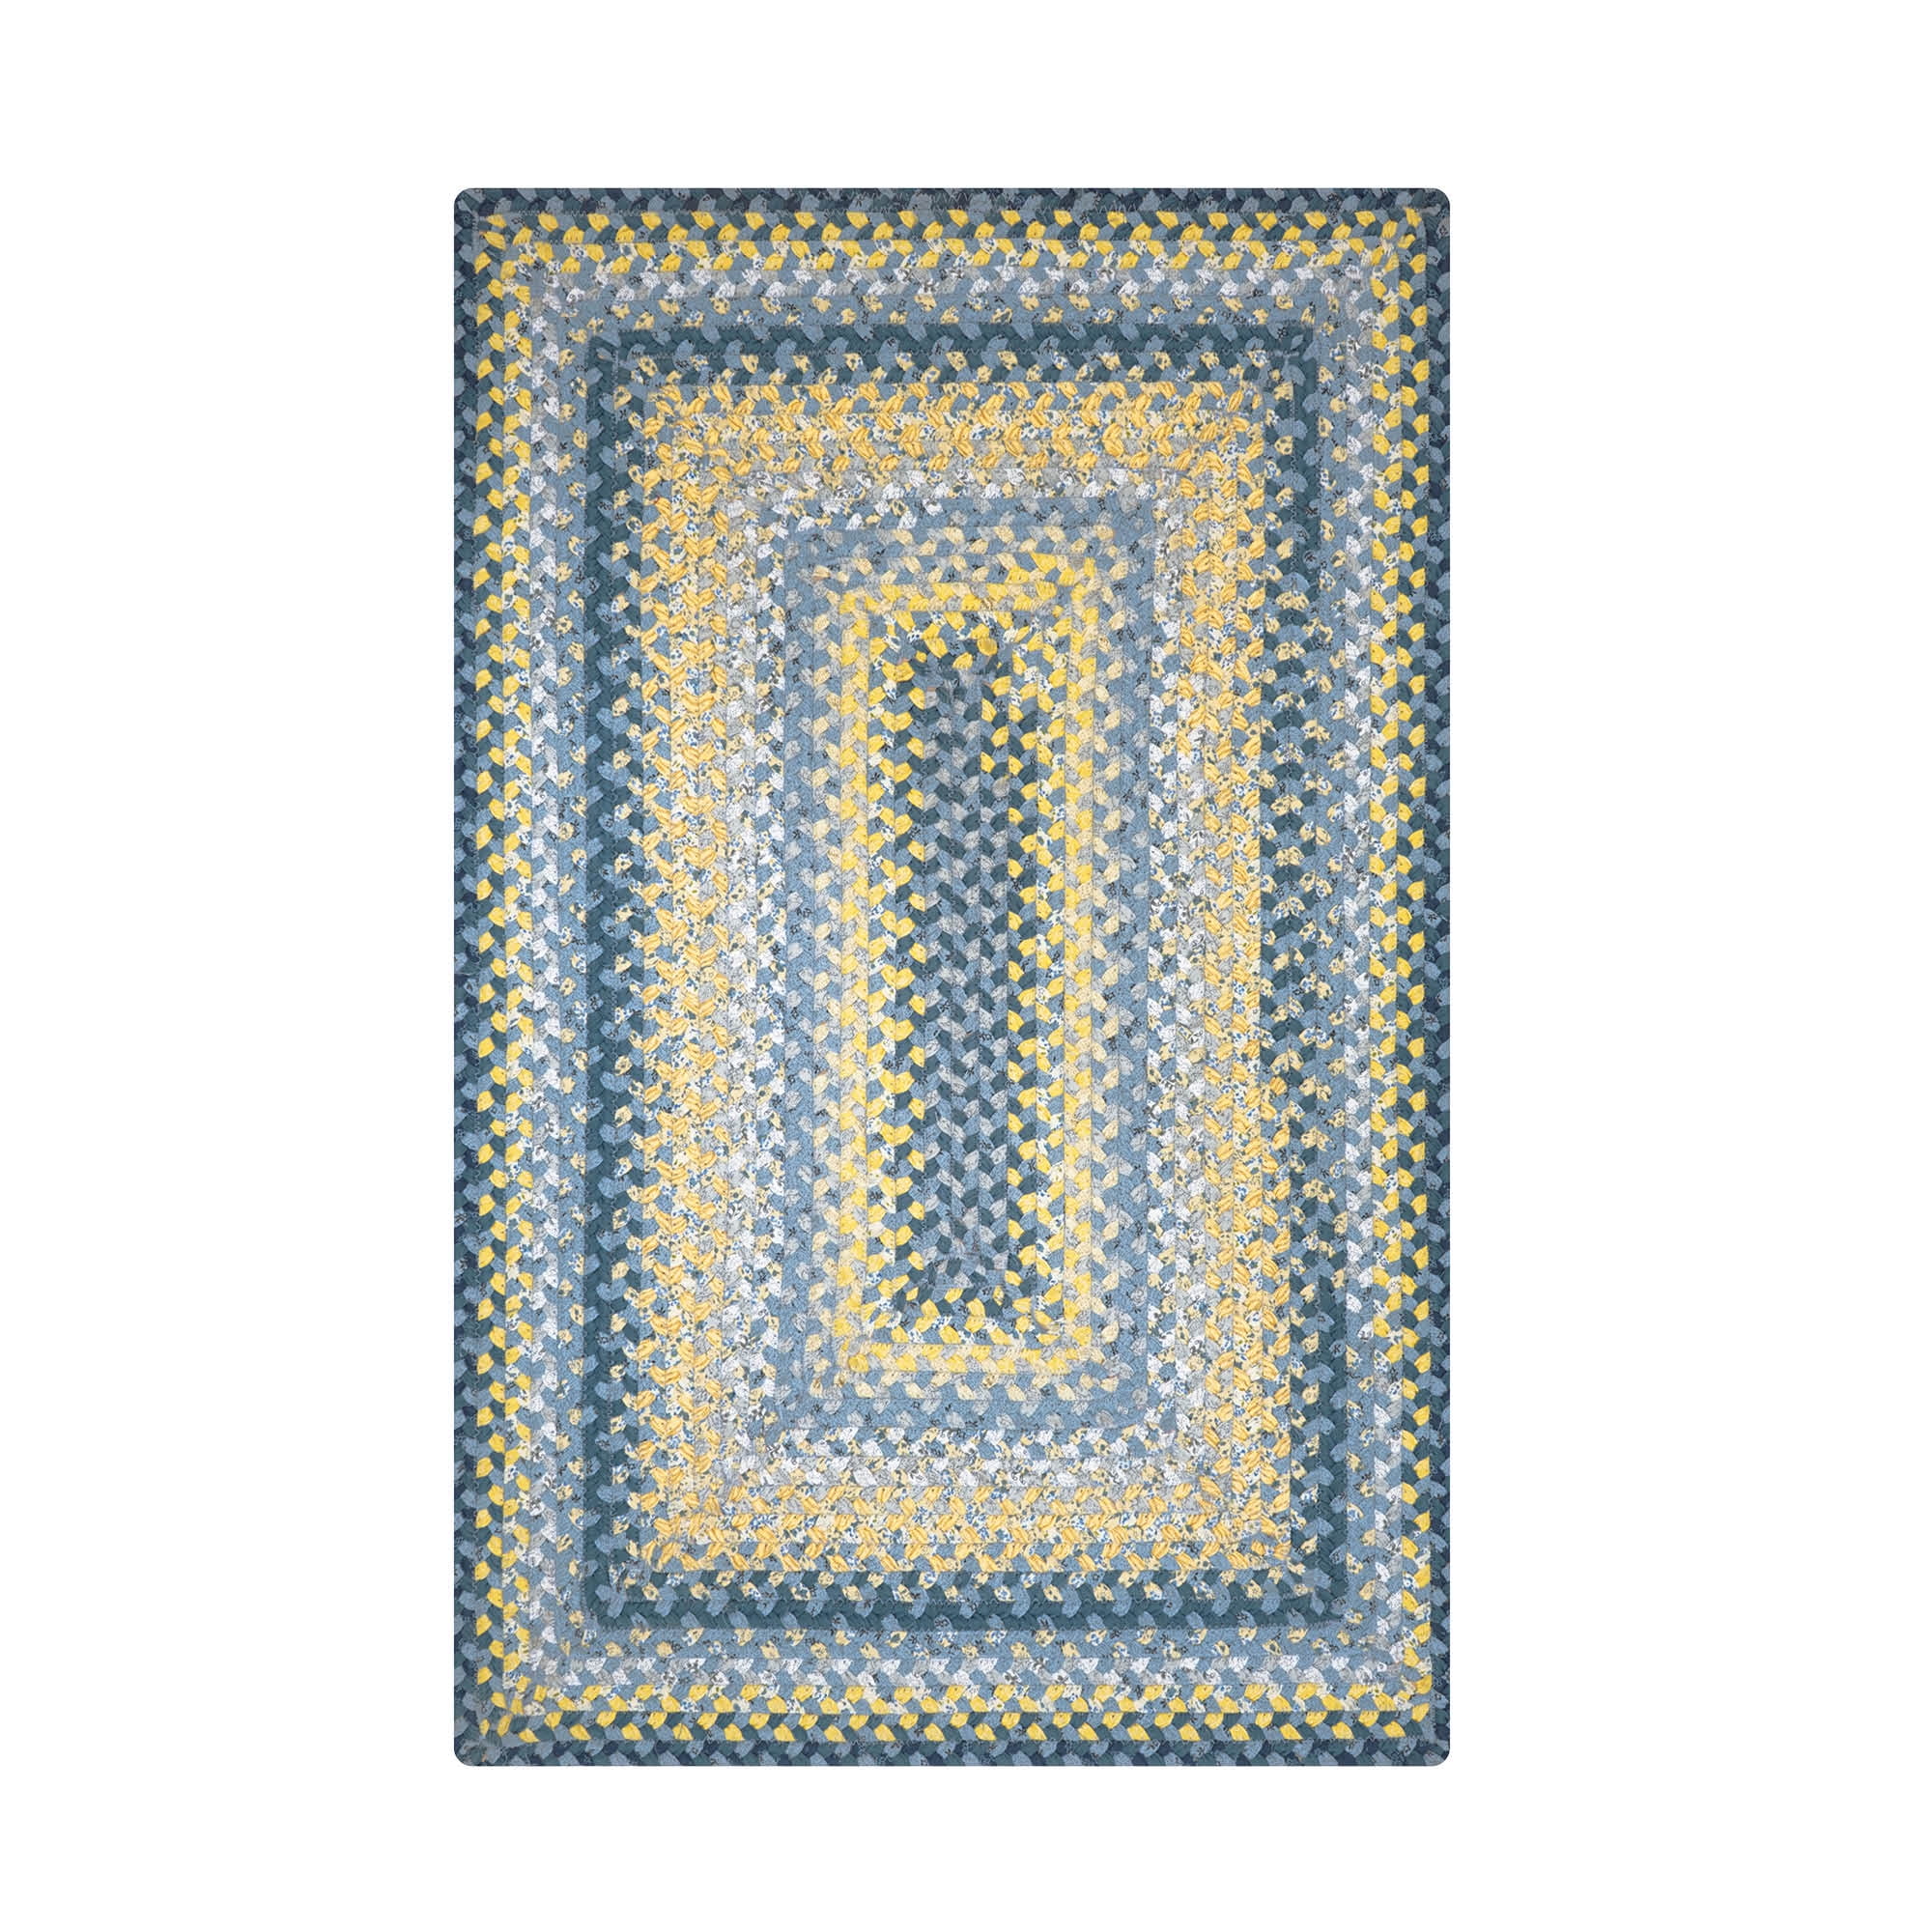 Baja Blue Cotton Braided Rugs by Homespice Decor